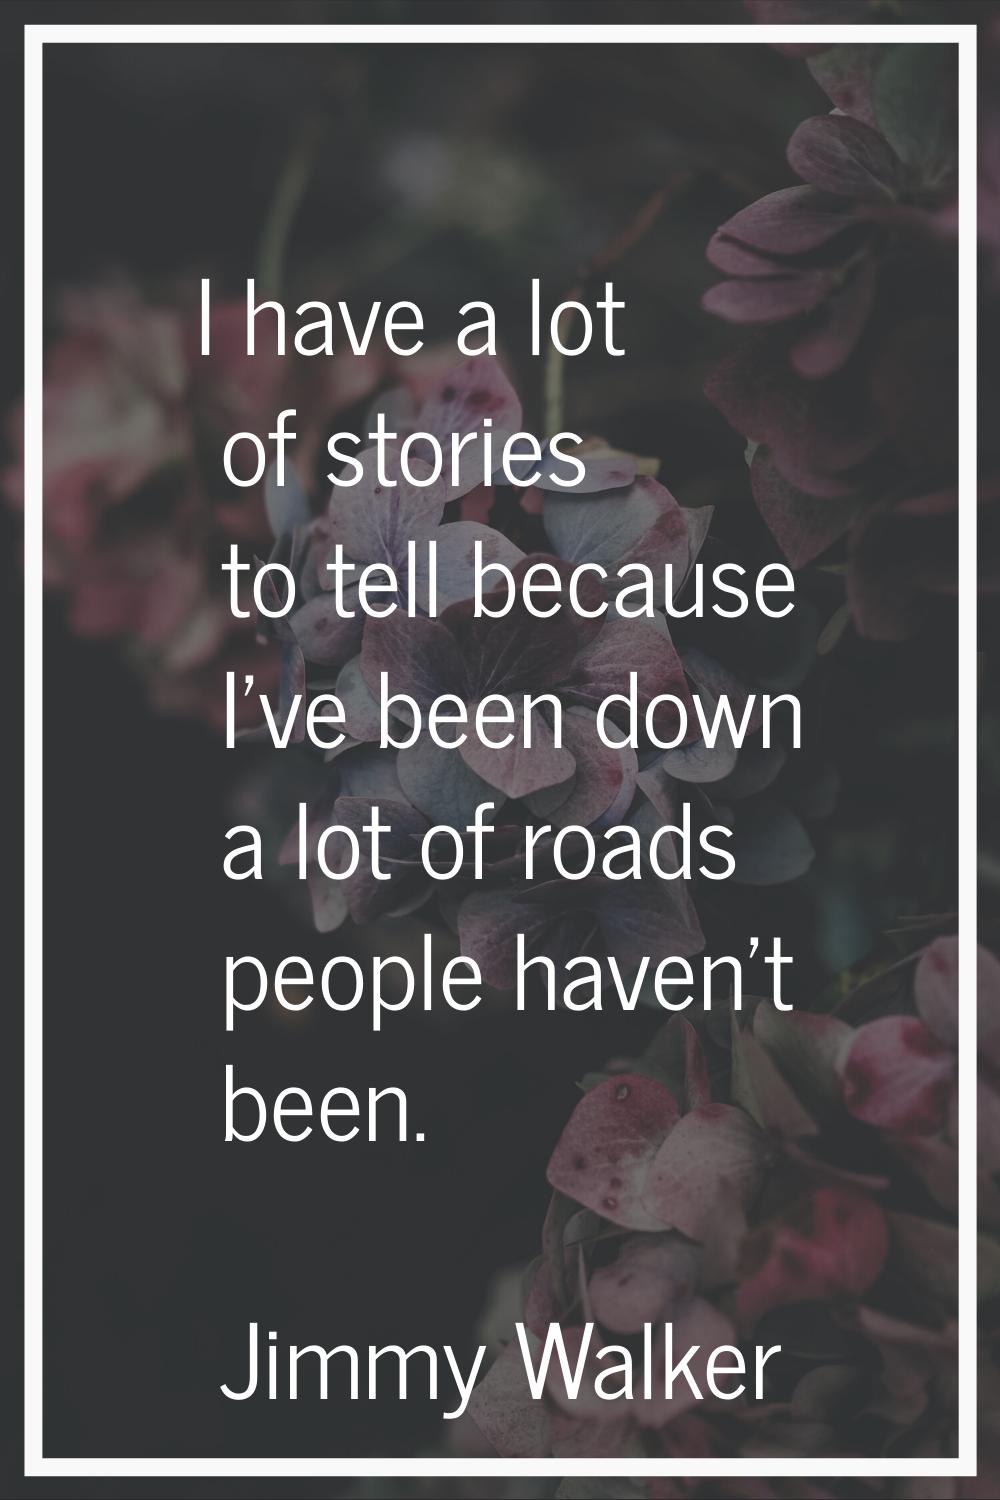 I have a lot of stories to tell because I've been down a lot of roads people haven't been.